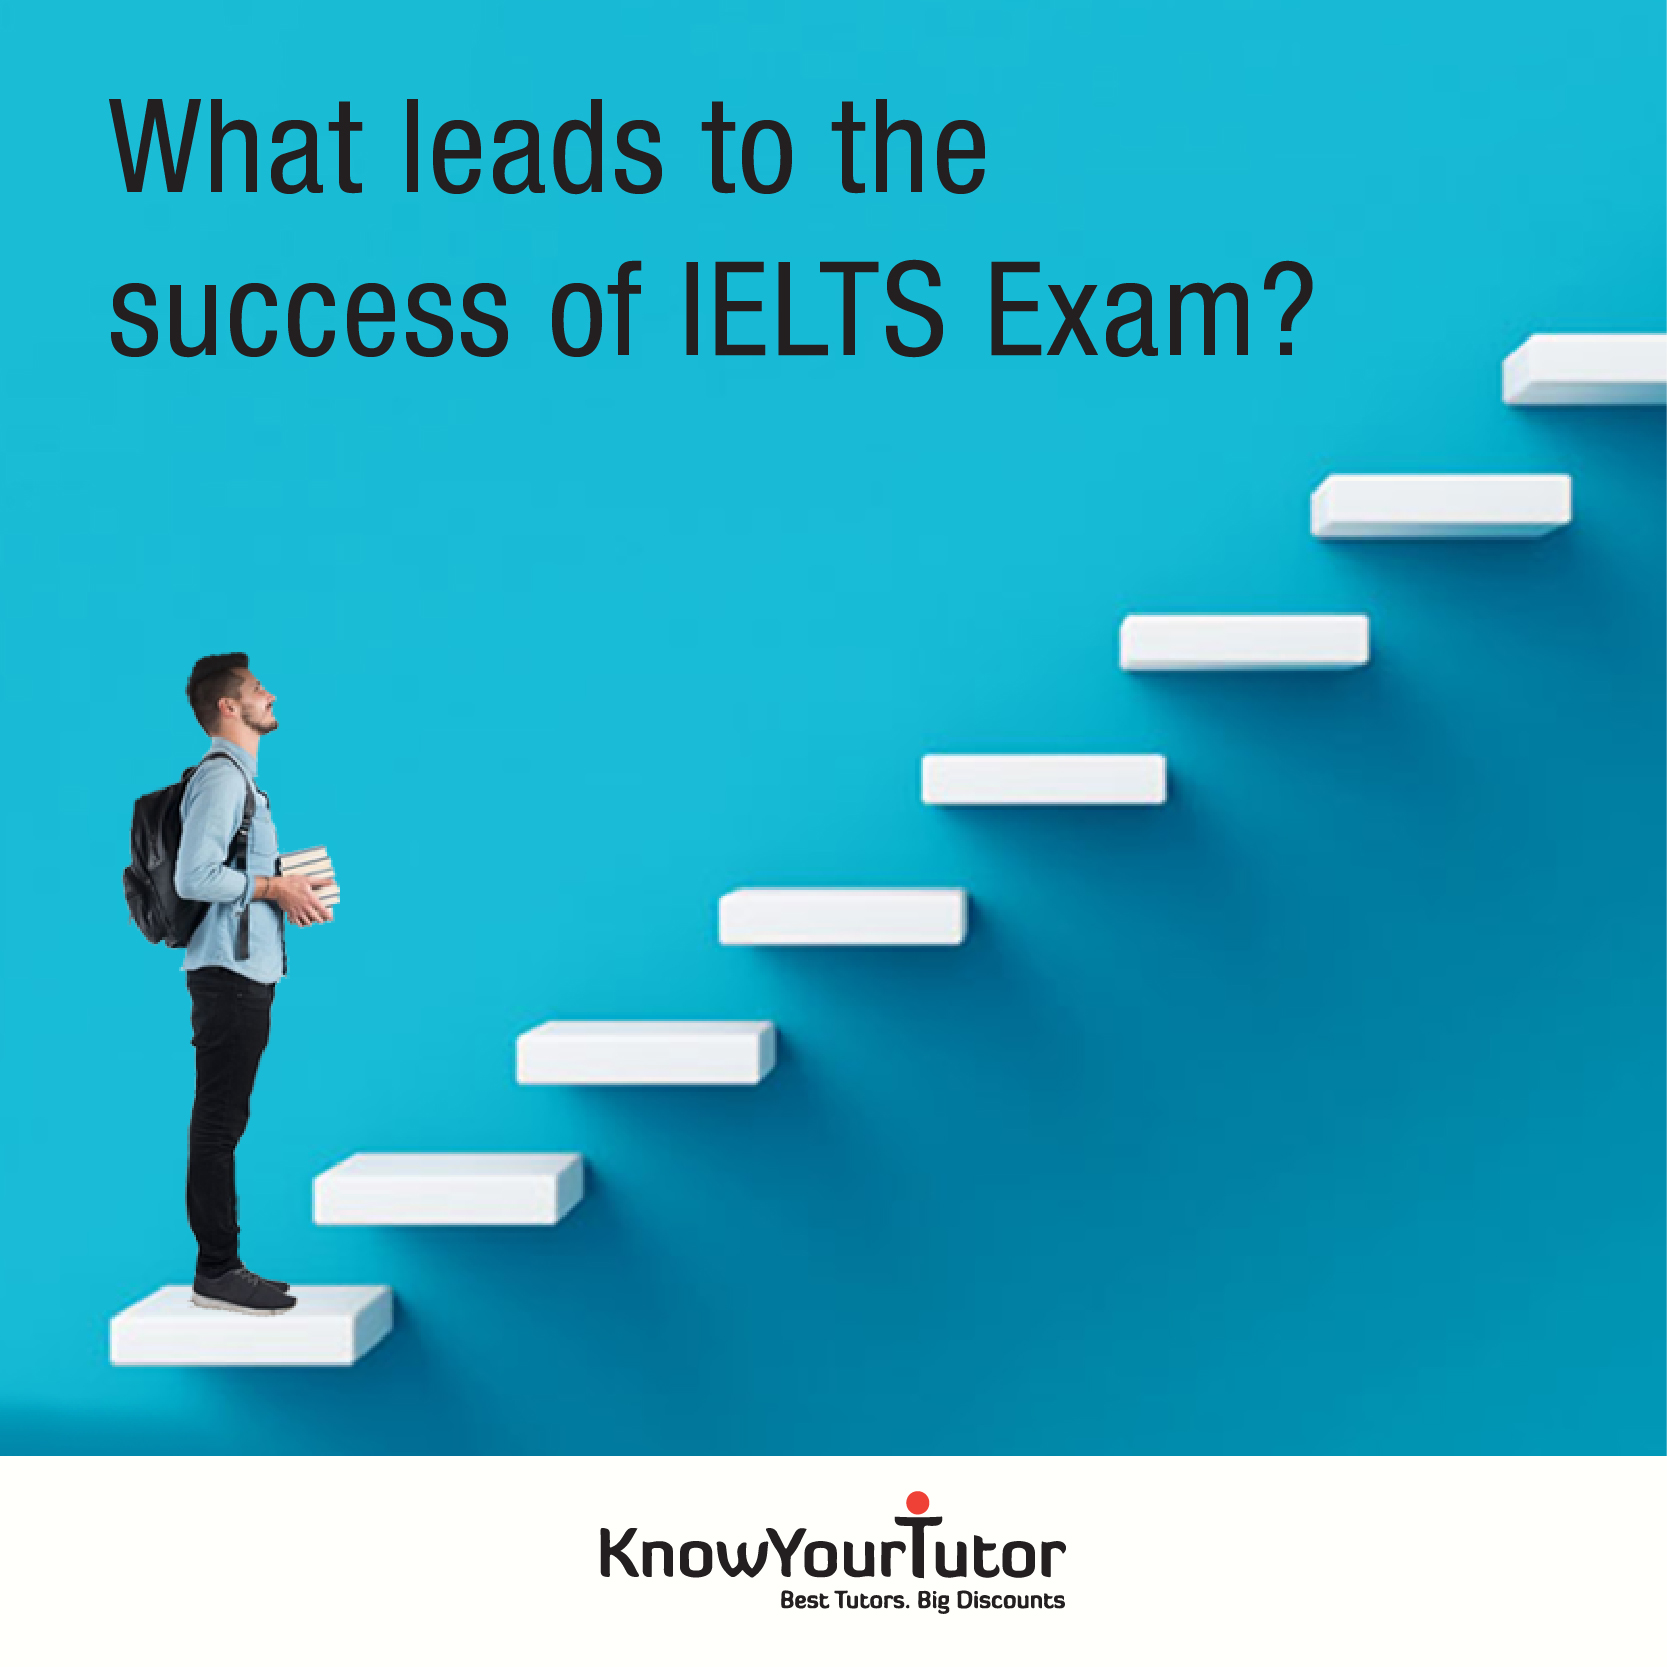 Steps for the success of IELTS Exam